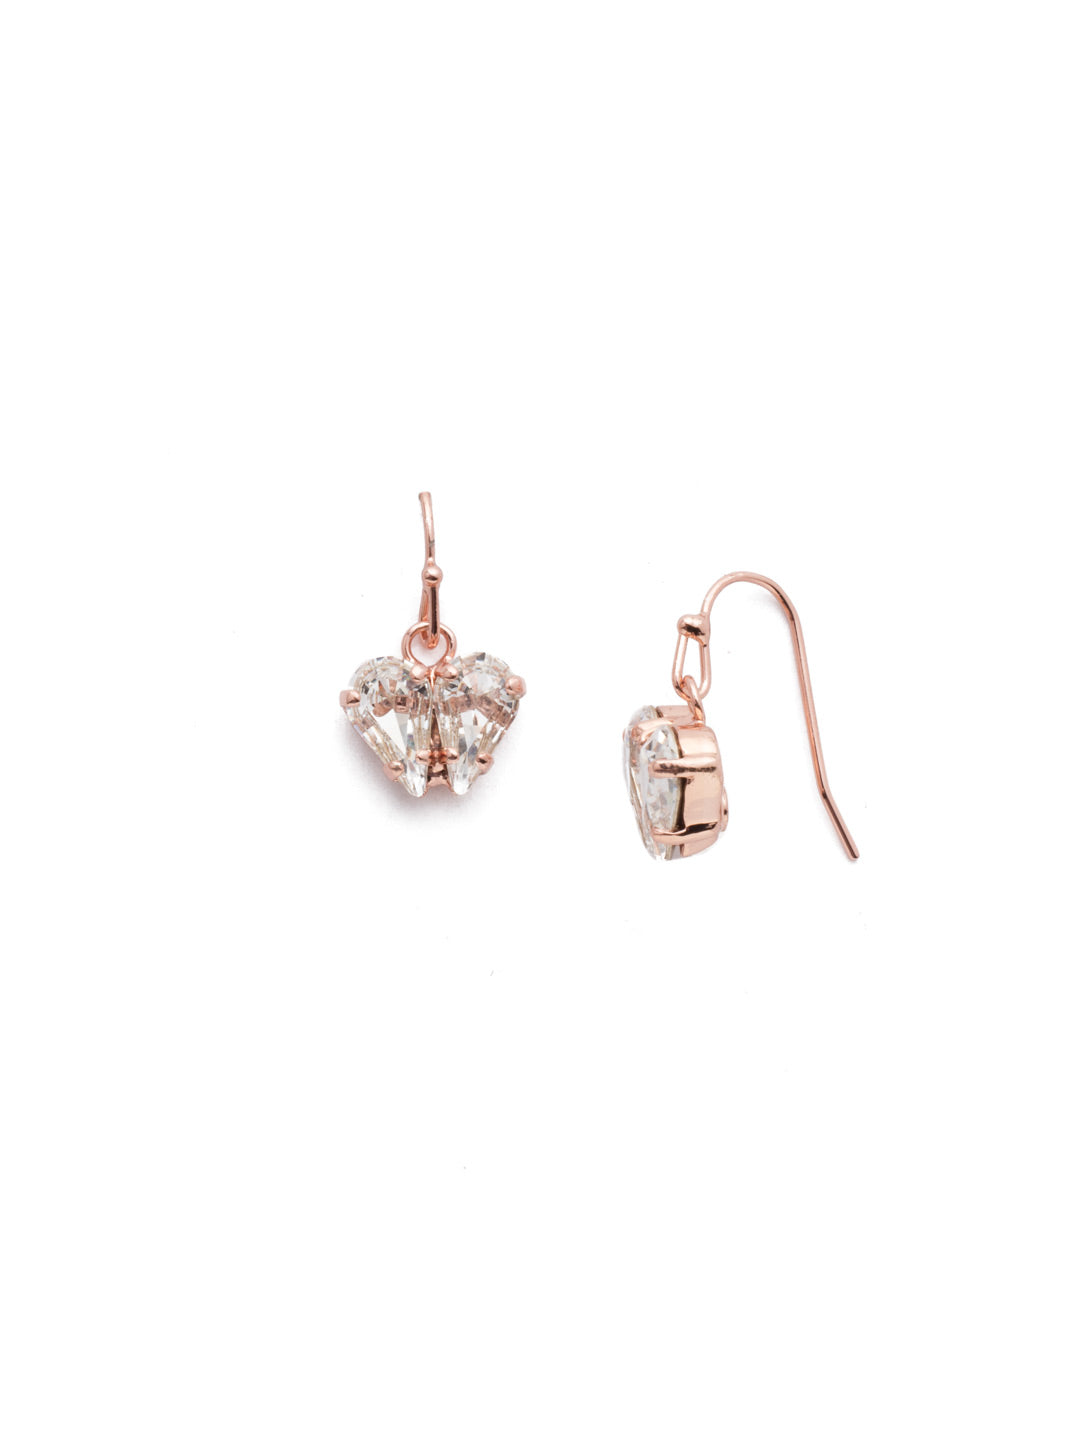 Marlowe Dangle Earrings - EER4RGCRY - <p>Make a simple, yet-stunning, statement wearing the Marlowe Dangle Earrings. A pair of pear-shaped crystals come together to form a heart and a look you'll love for years to come. From Sorrelli's Crystal collection in our Rose Gold-tone finish.</p>